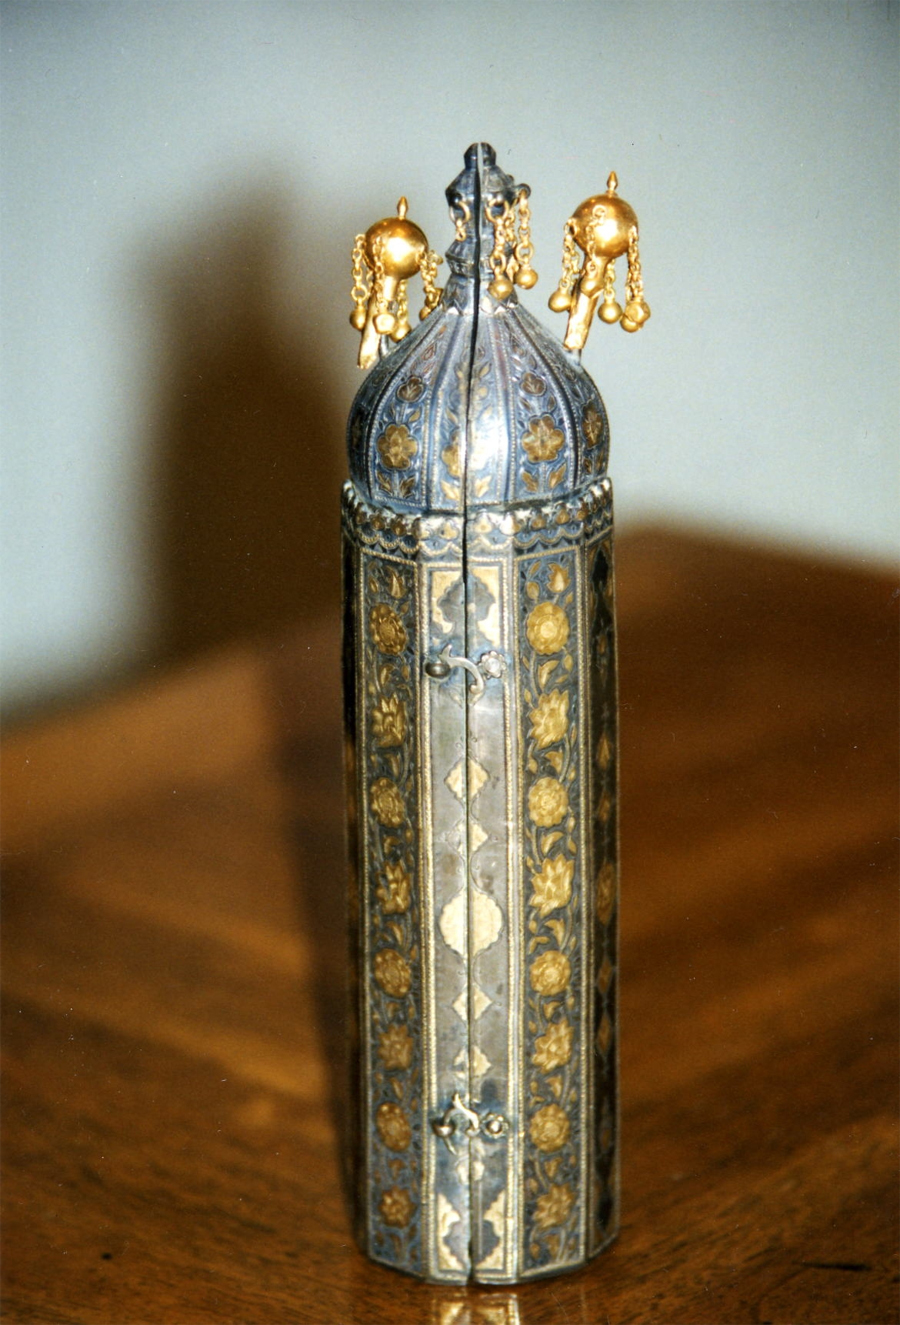 Photograph of the ornate scroll case